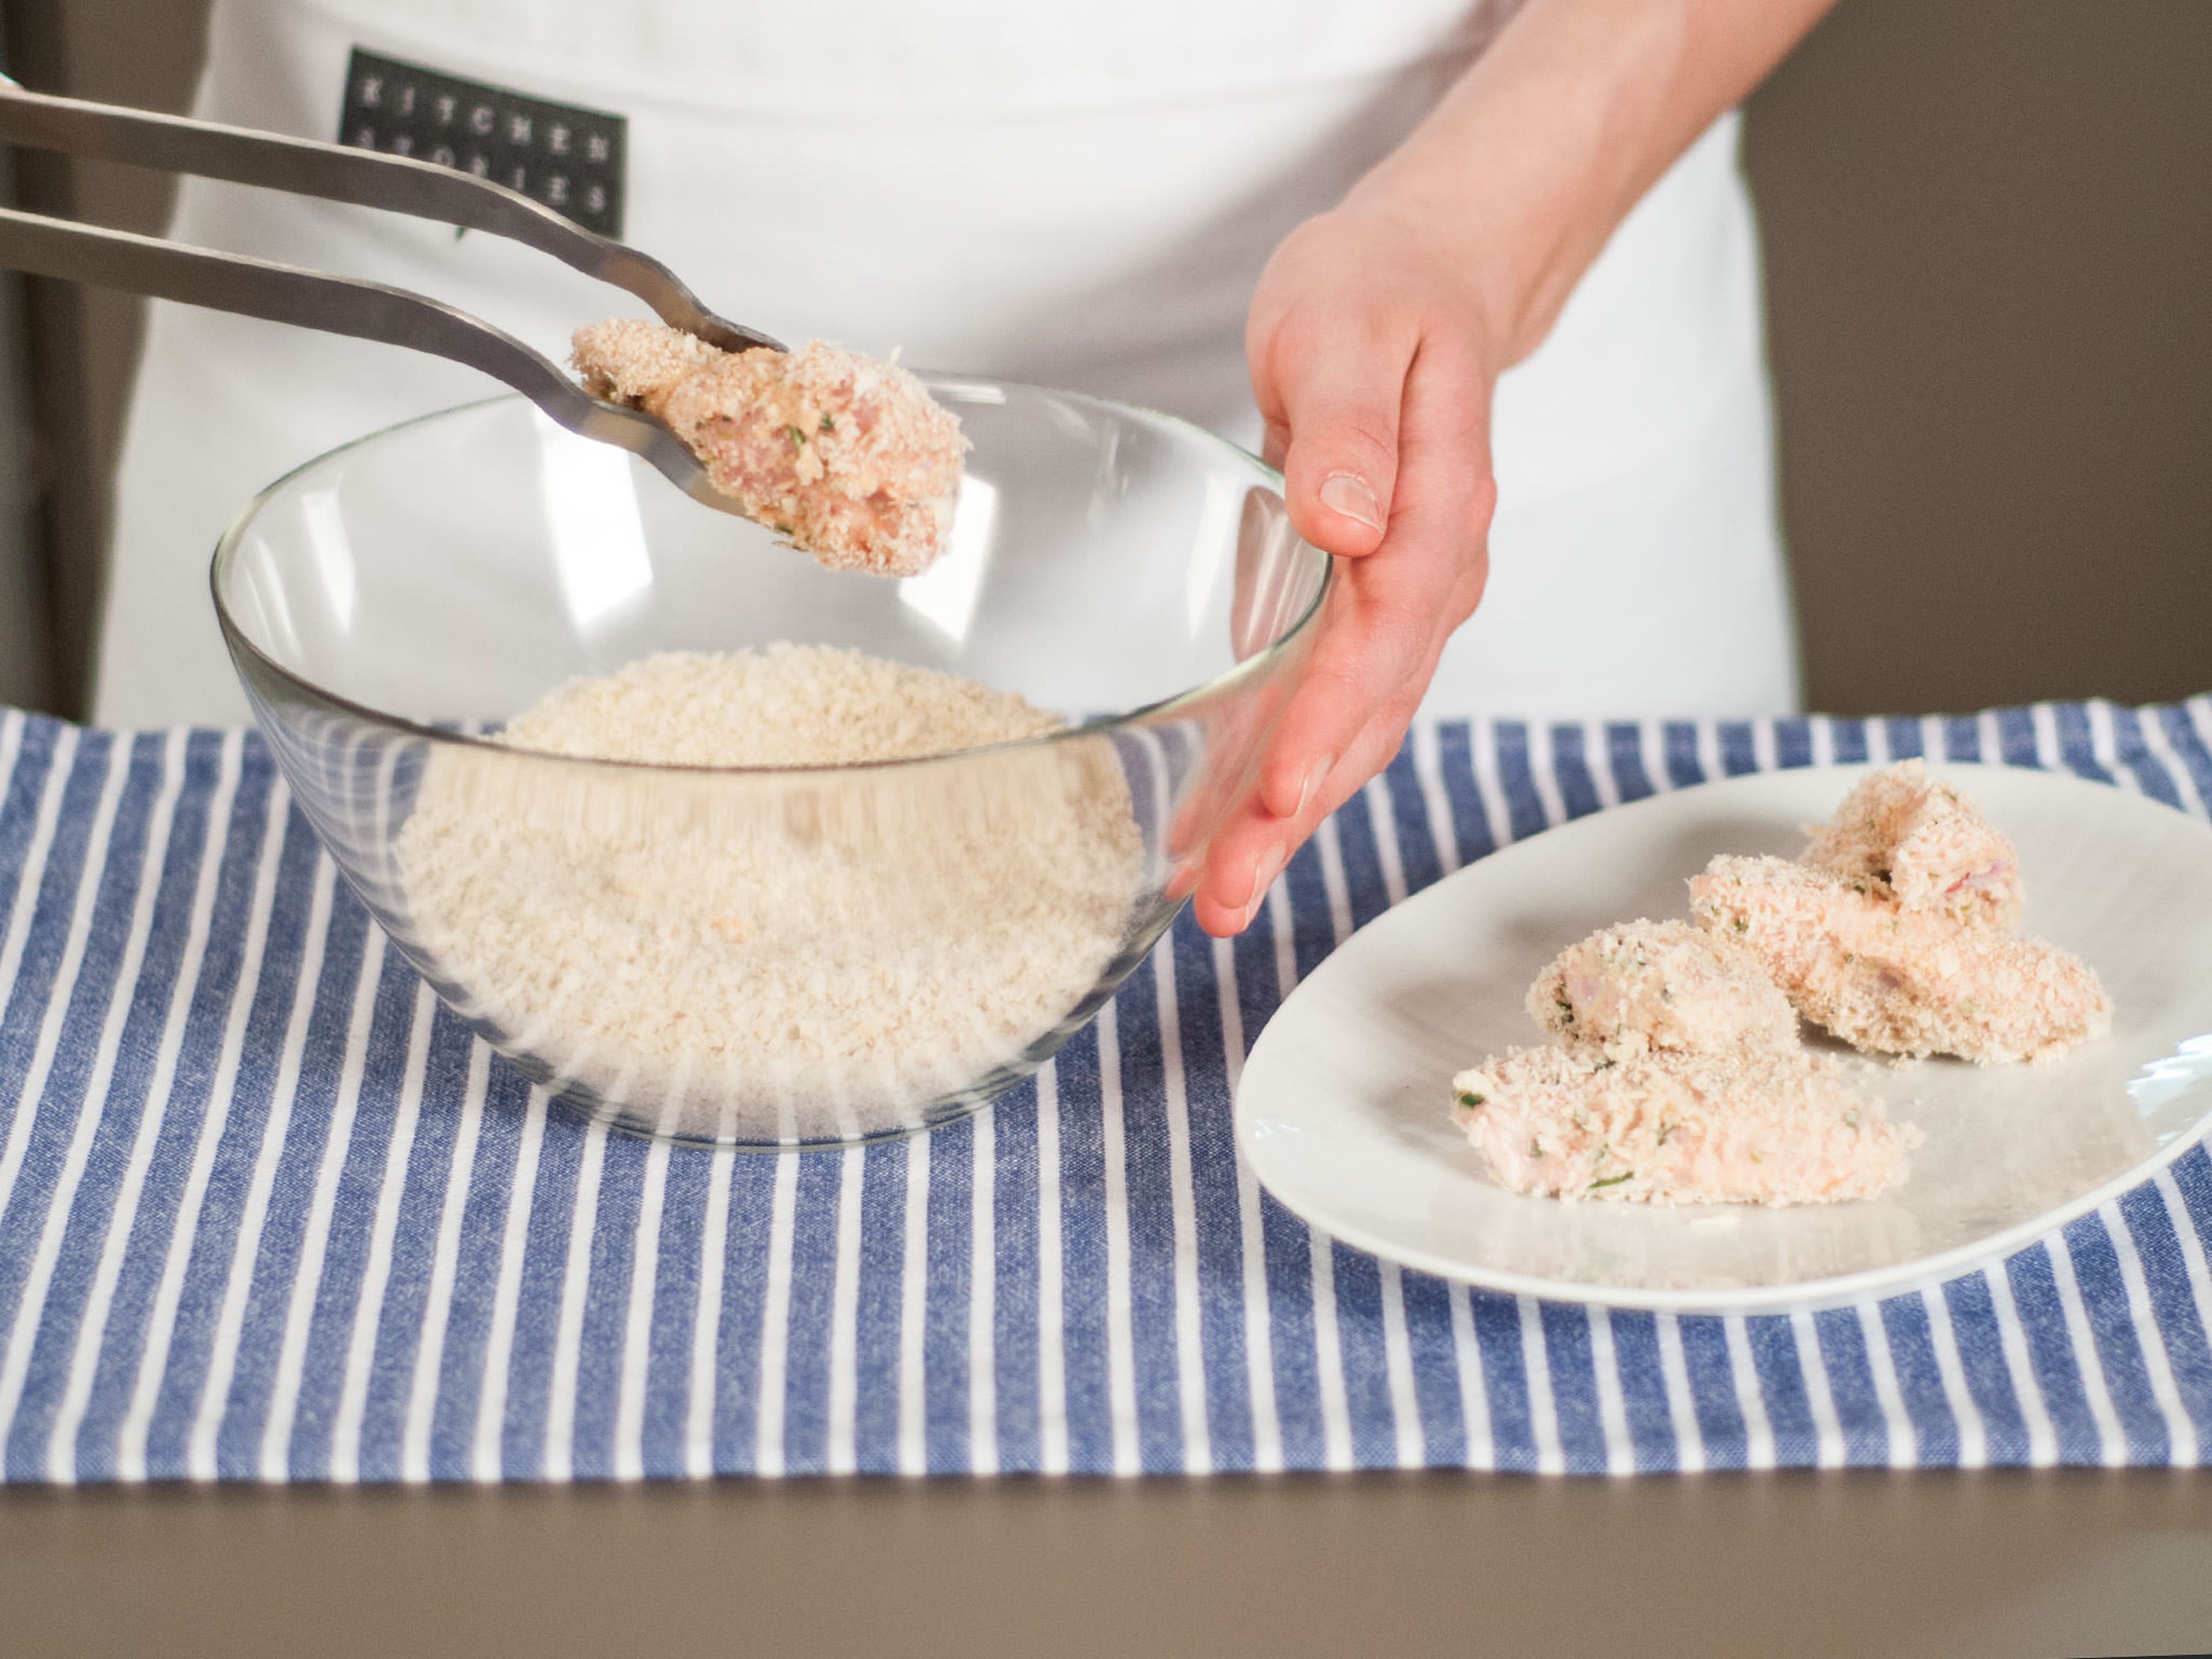 Add flour to a bowl and bread crumbs to another bowl. Toss marinated wings in flour, shaking the excess off. Dip back into the buttermilk marinade then coat chicken wings with bread crumbs, using tongs to make sure they are coated on all sides.